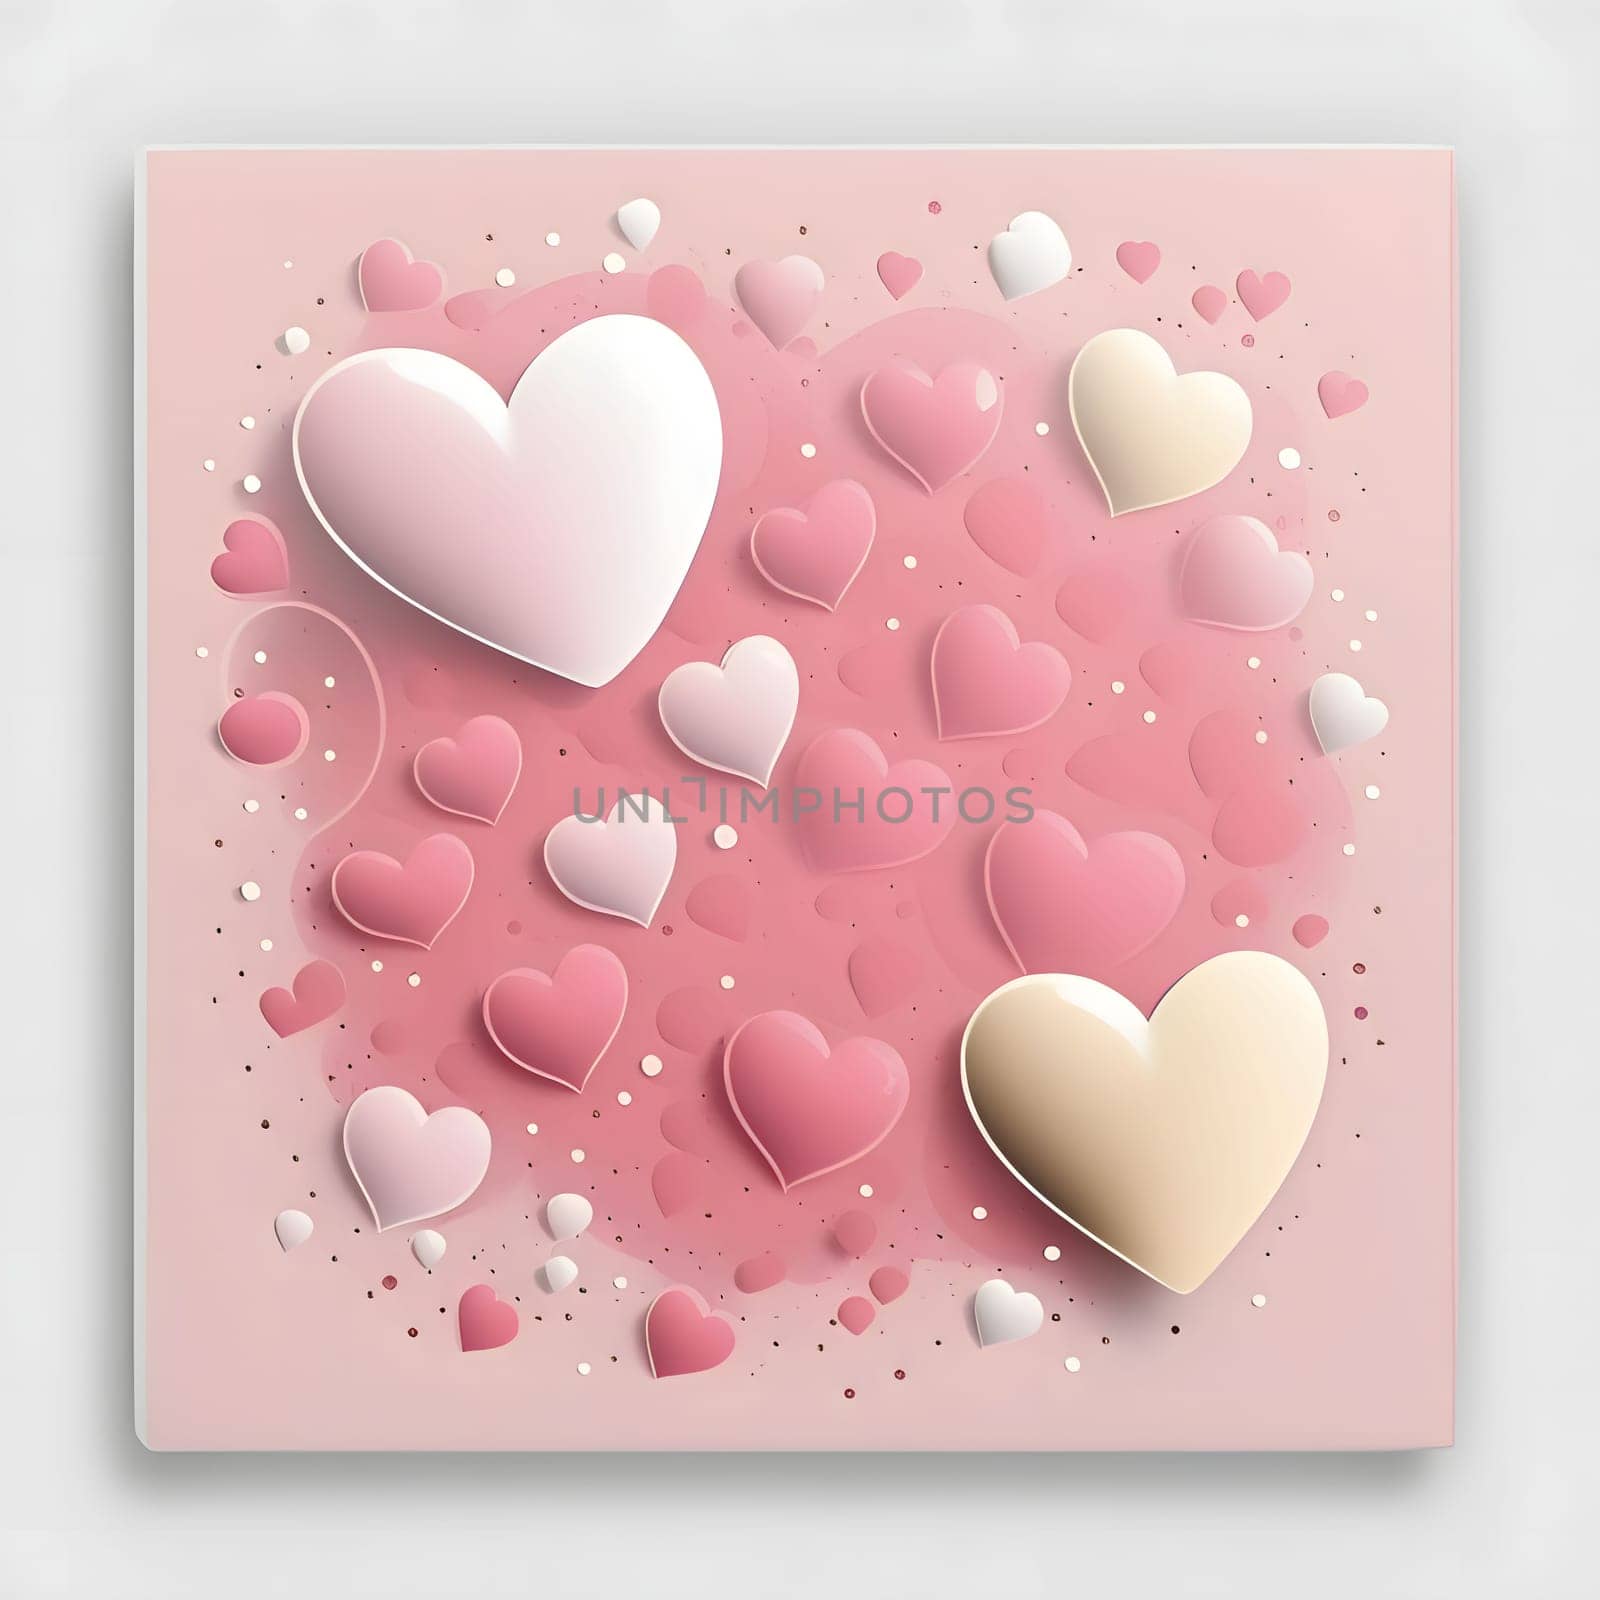 Pink and white hearts on a pink background card. Heart as a symbol of affection and love. by ThemesS